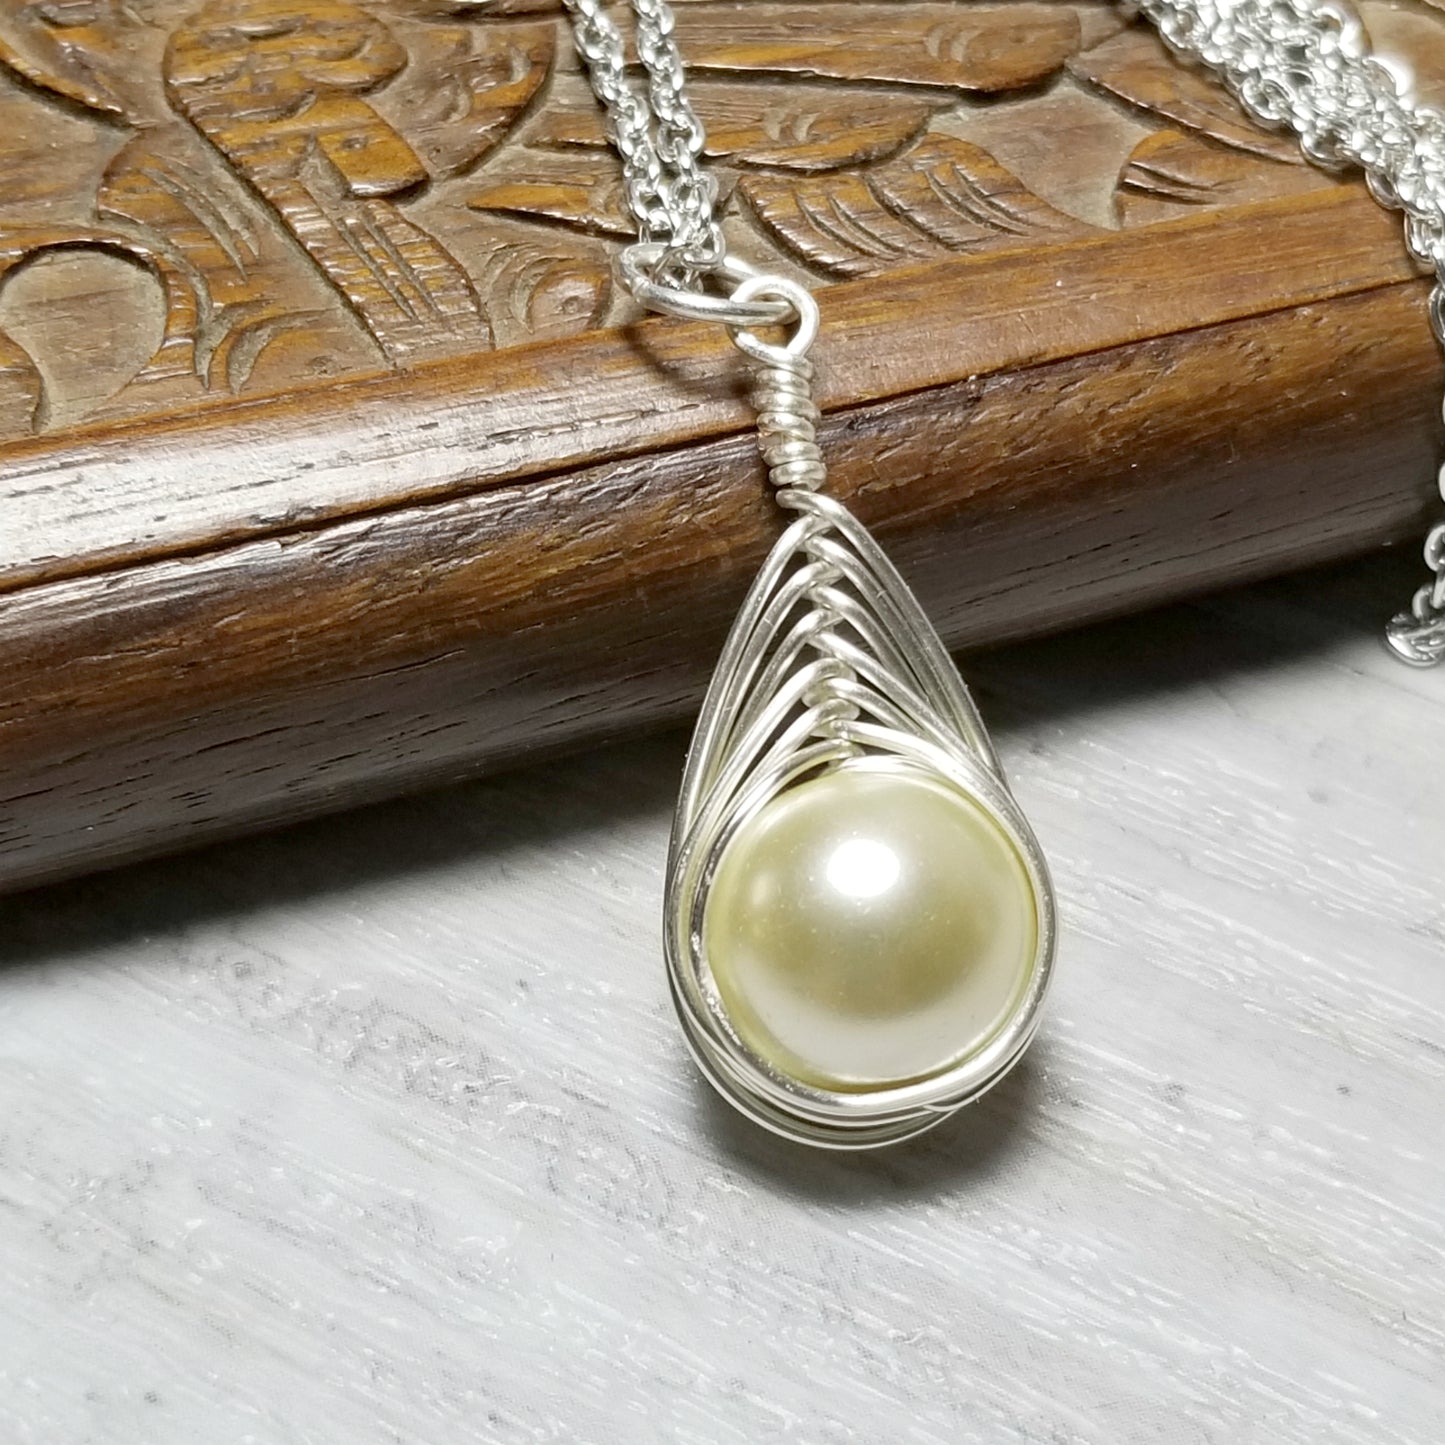 Wire Wrapped Herringbone Necklace, Pearl Pendant